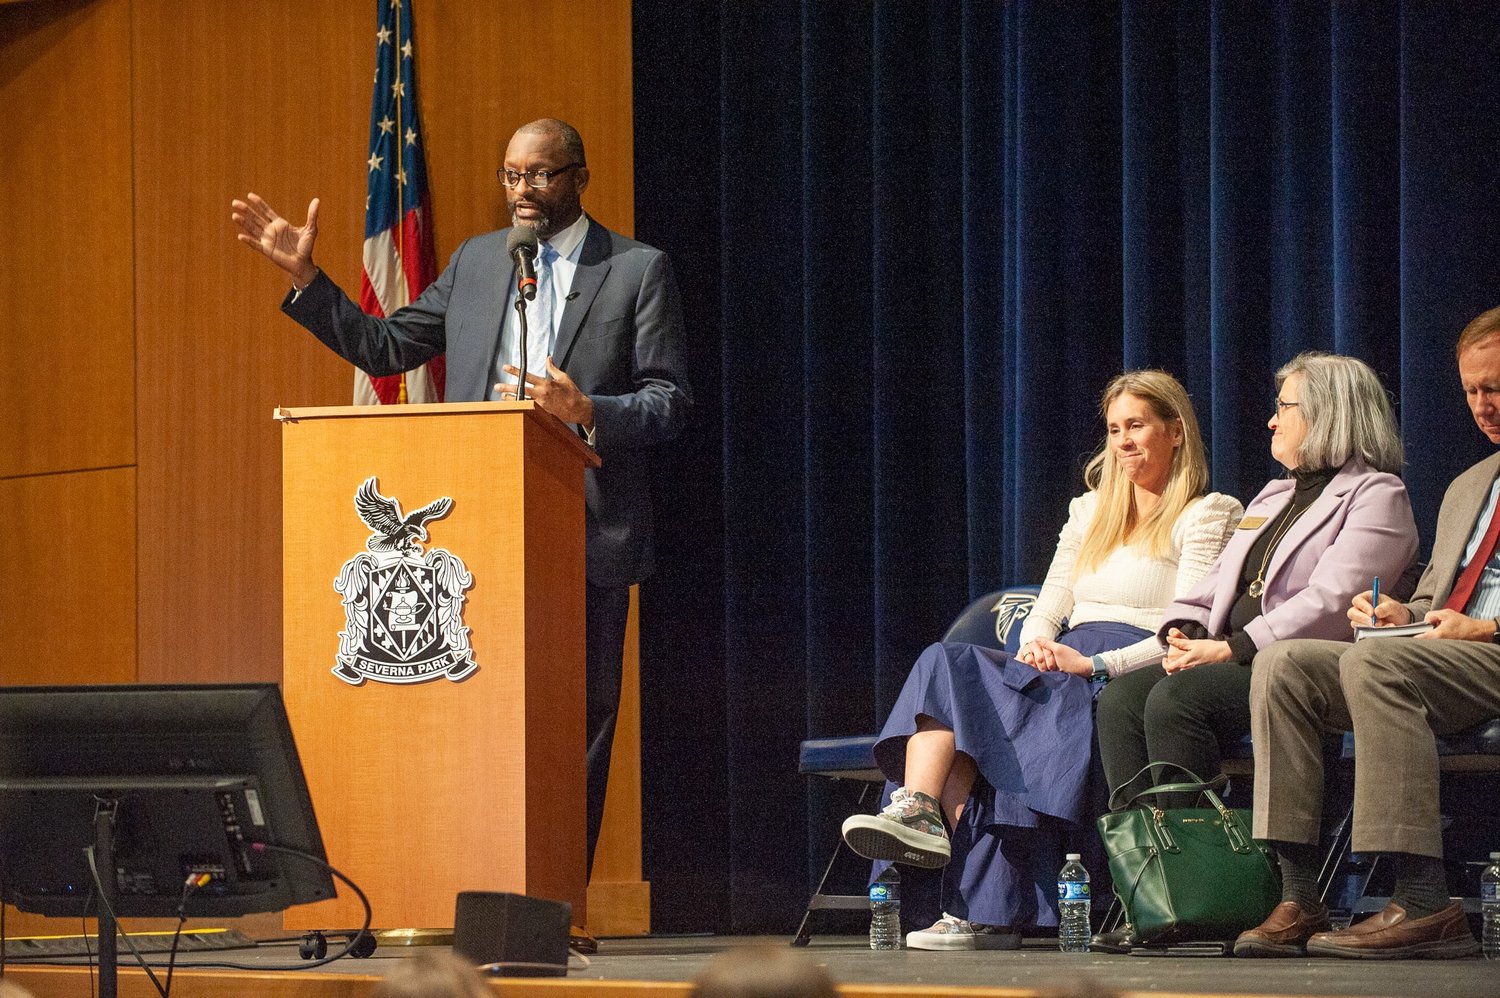 During a January event at SPHS, Superintendent Mark Bedell stressed acceptance, accessibility and sense of belonging.